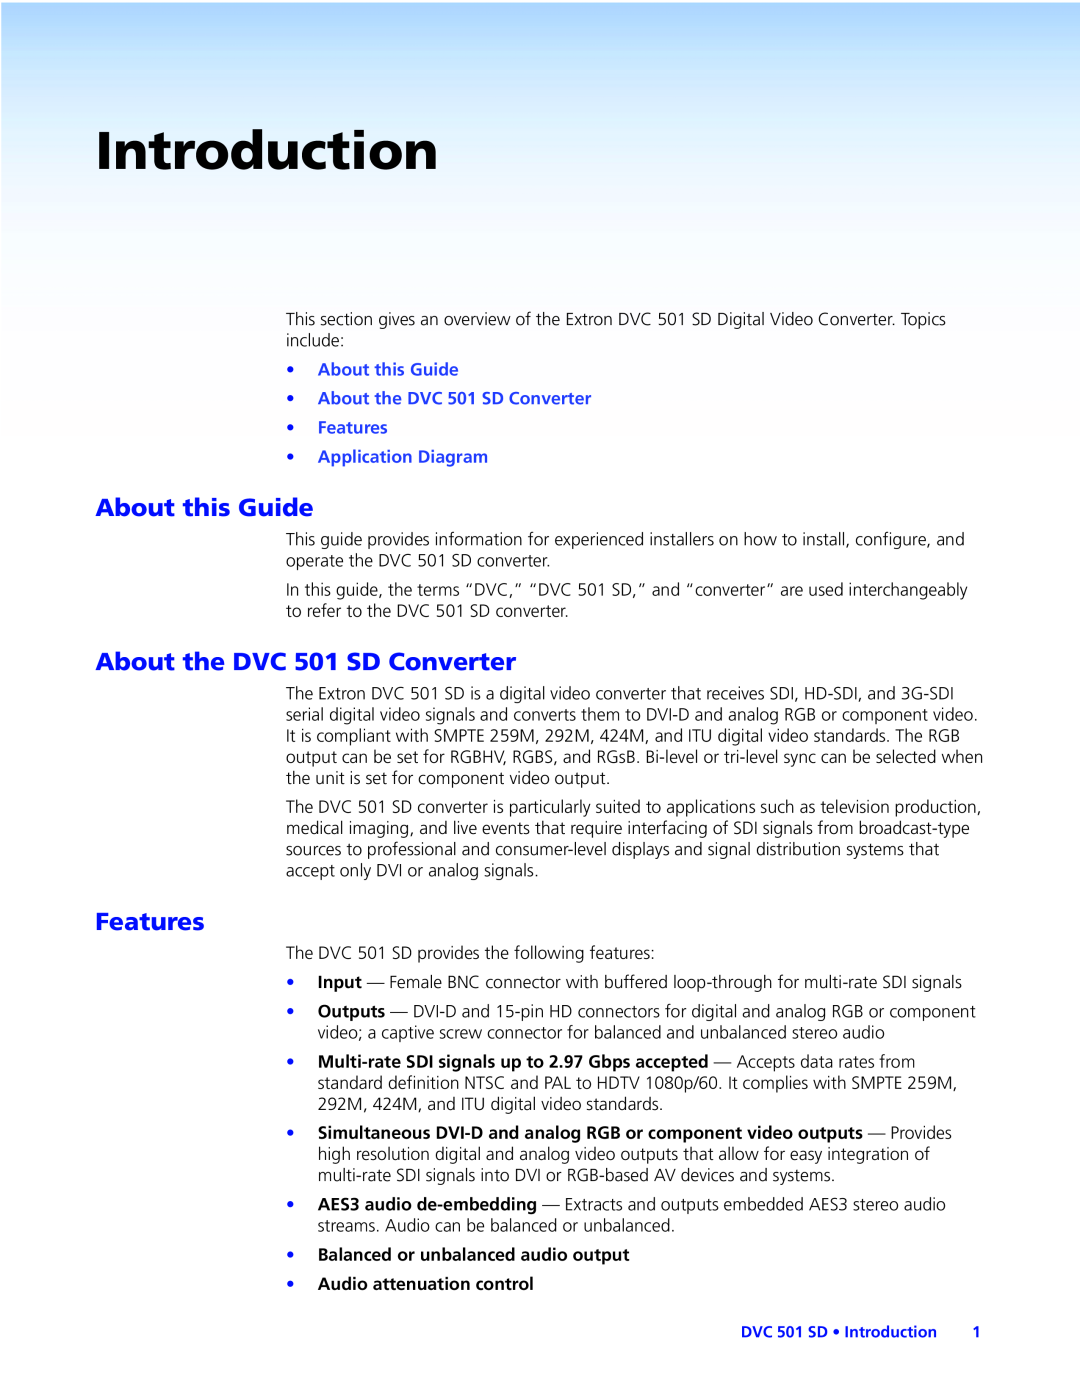 Extron electronic DVC501SD manual Introduction, About this Guide, About the DVC 501 SD Converter, Features 